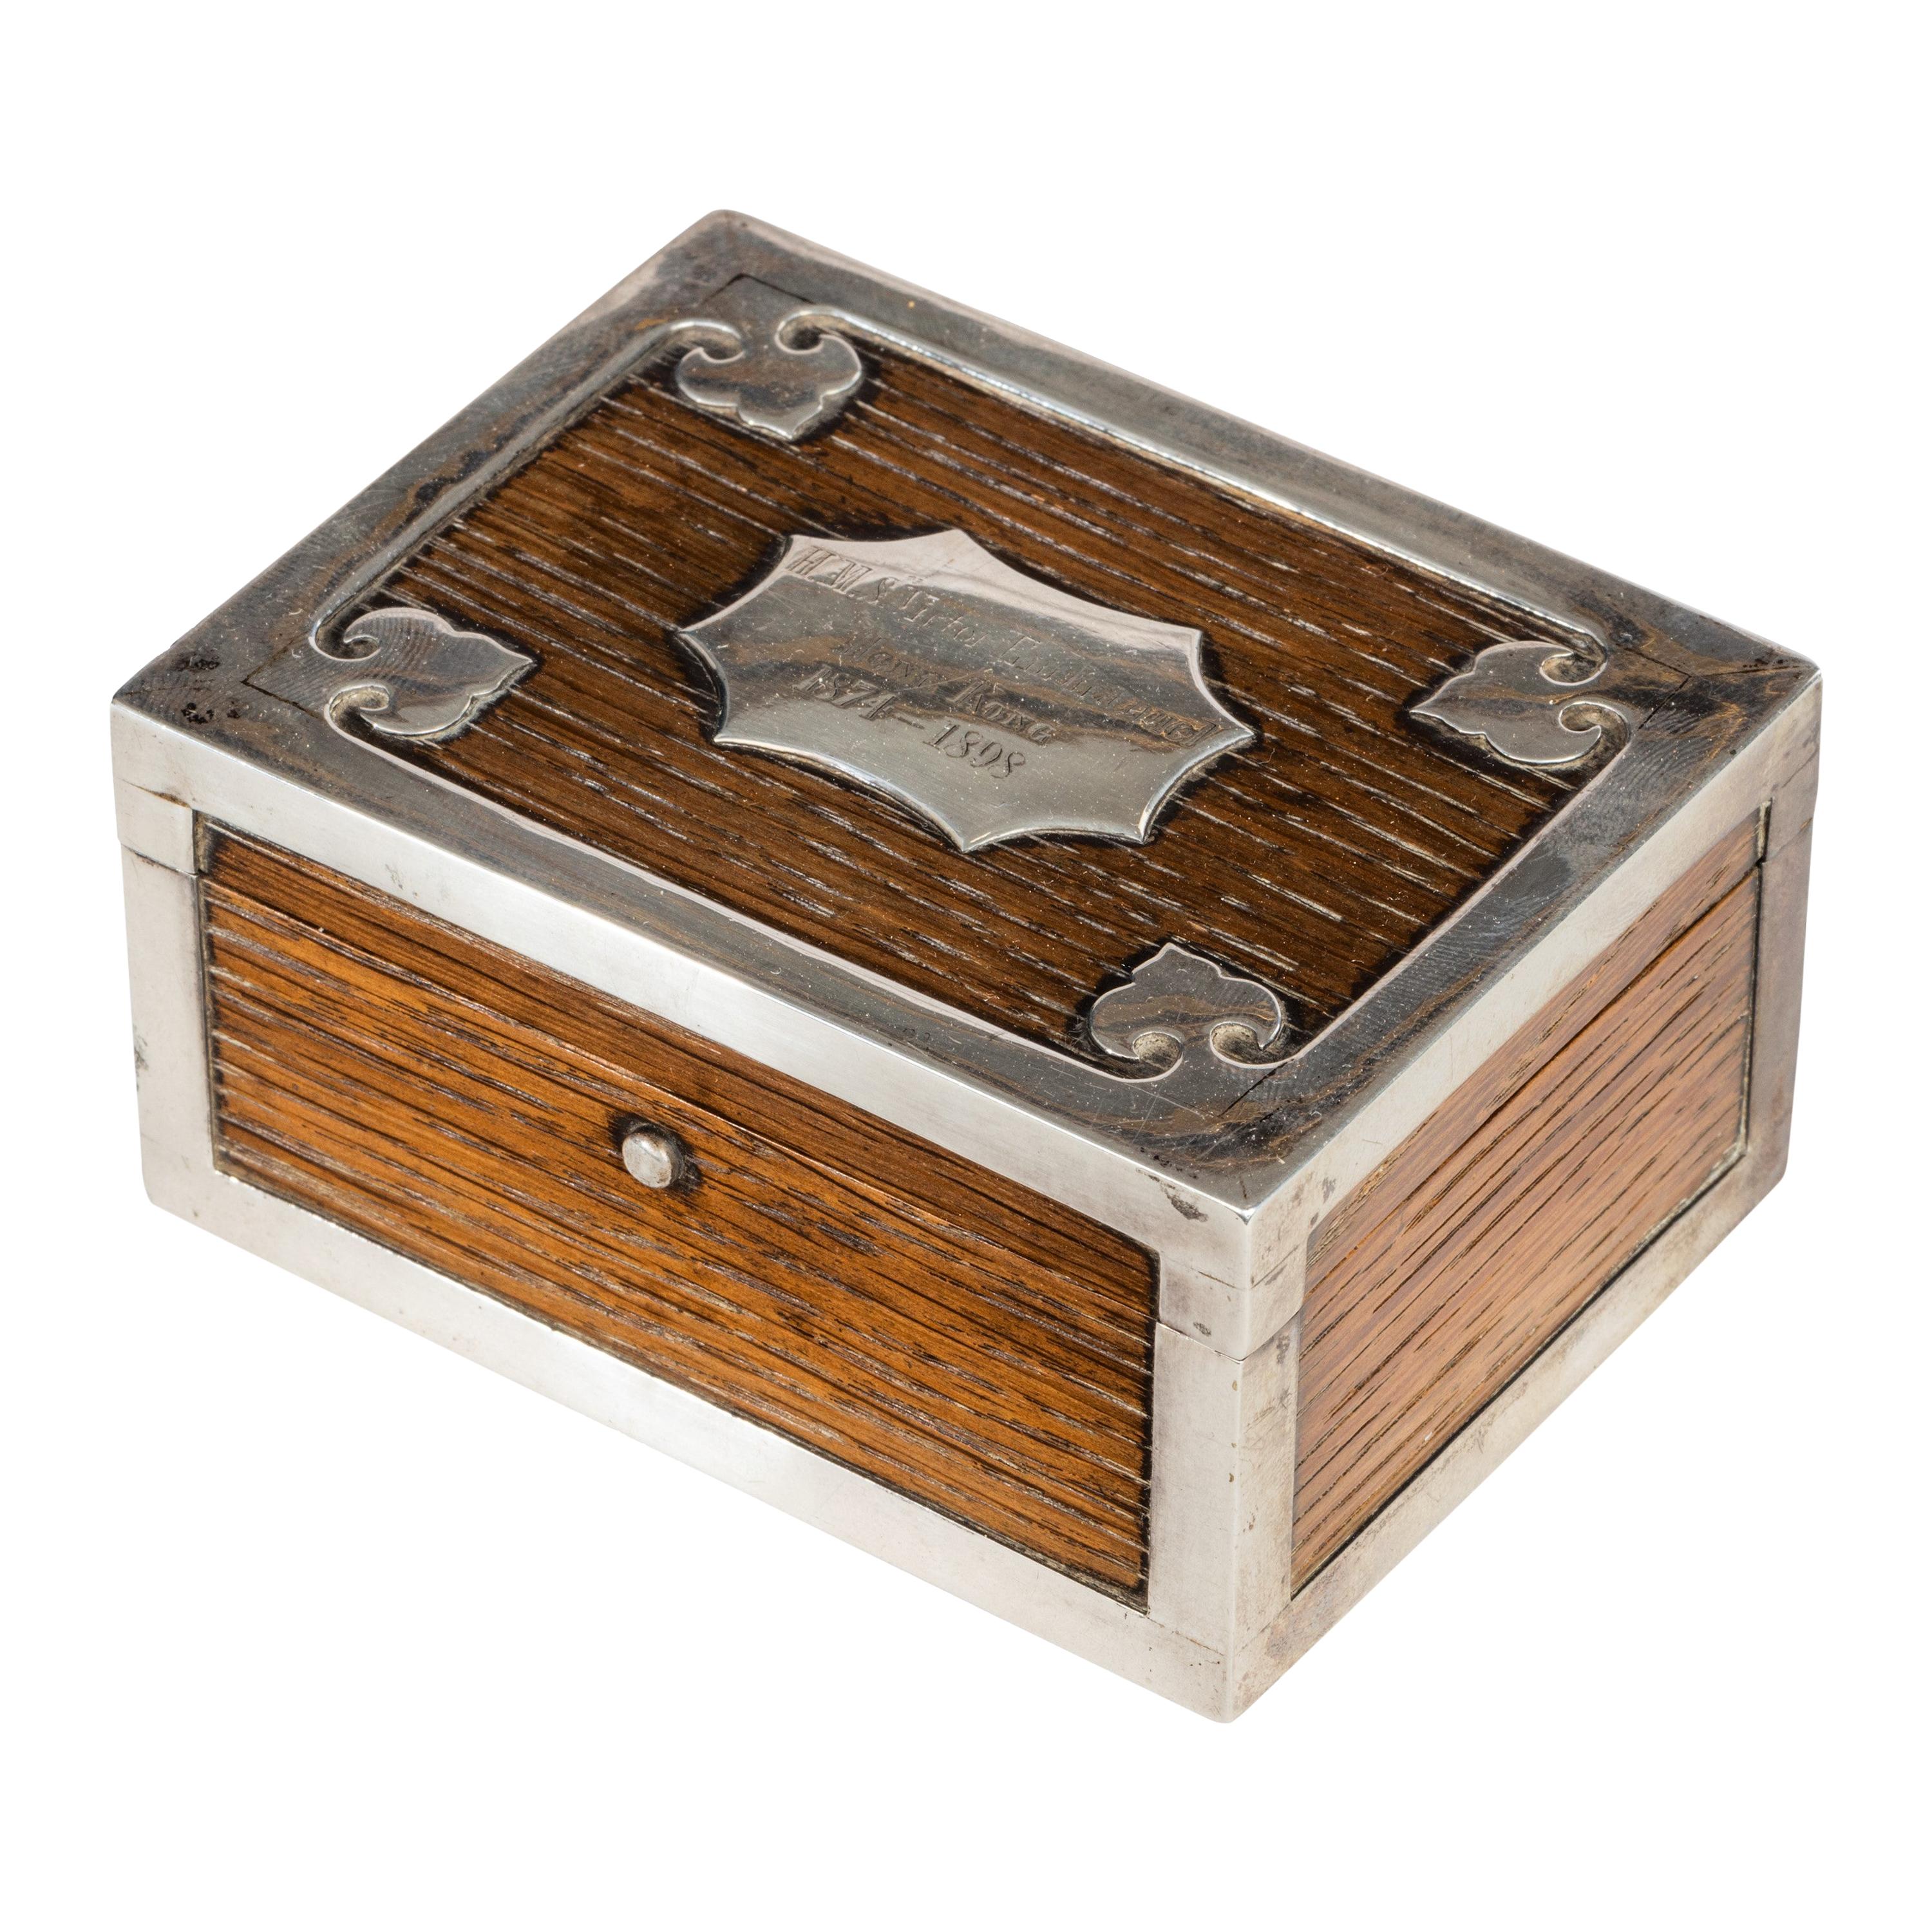 Silver Mounted Oak Box from the Ship's Timbers of Hms Victor Emmanuel